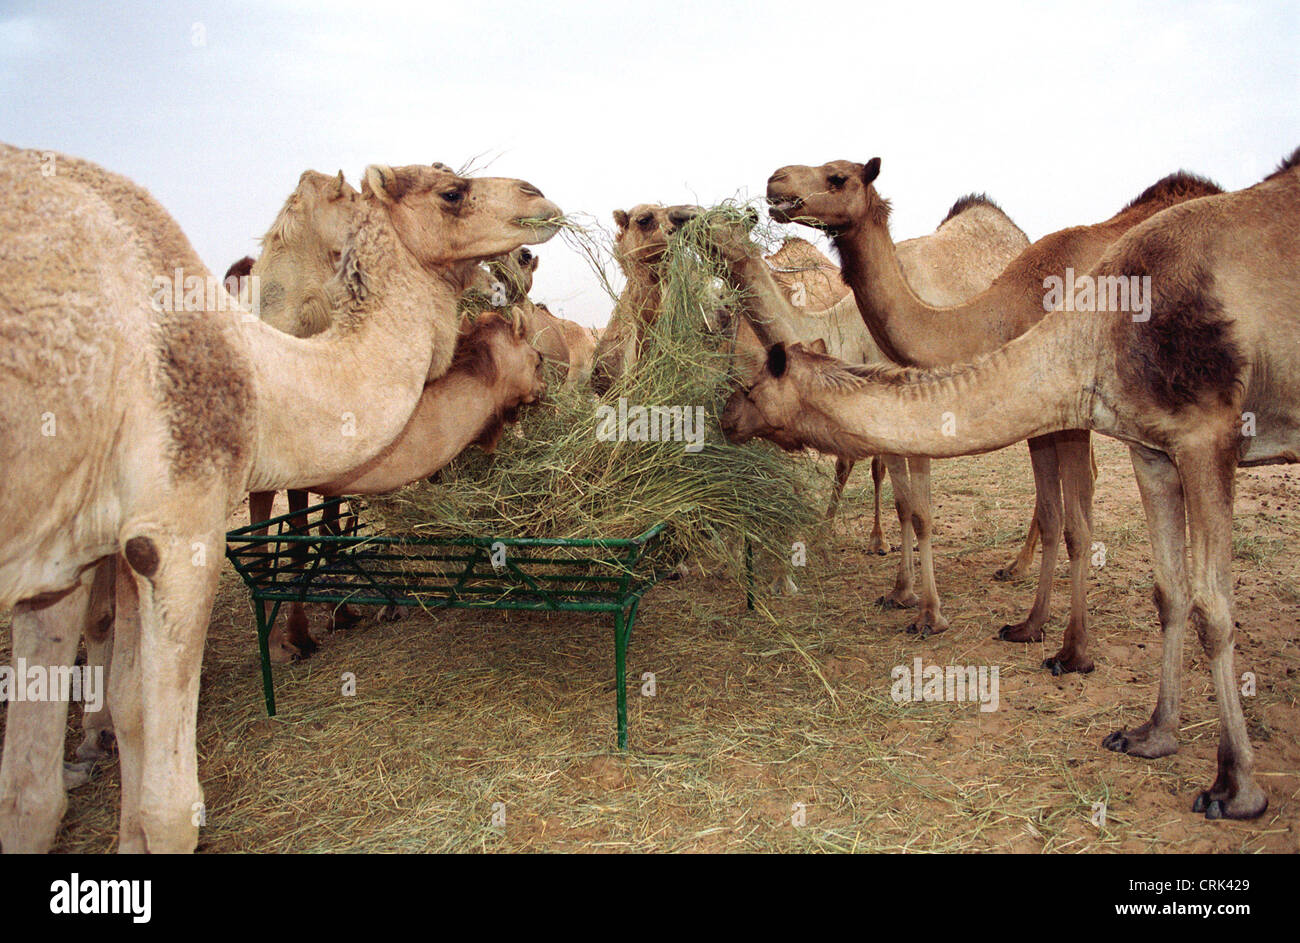 What do camels eat?